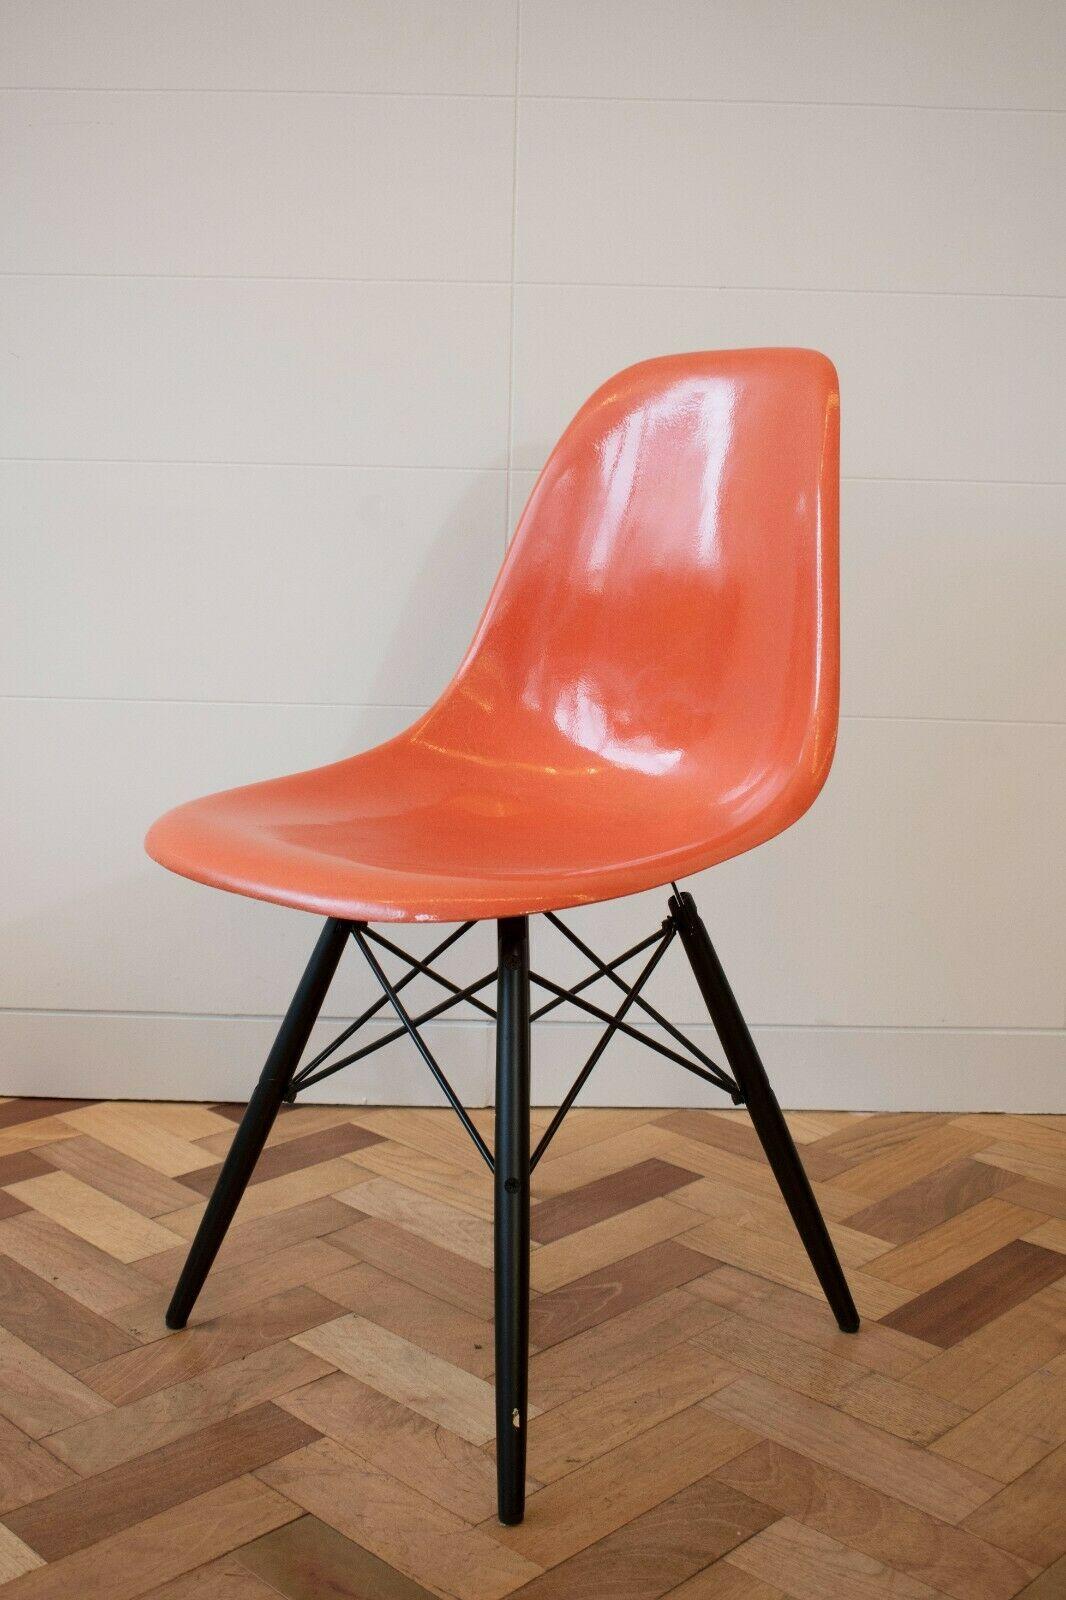 Fiberglass Set of 8 1960s Fibreglass Chairs by Charles and Ray Eames for Herman Miller